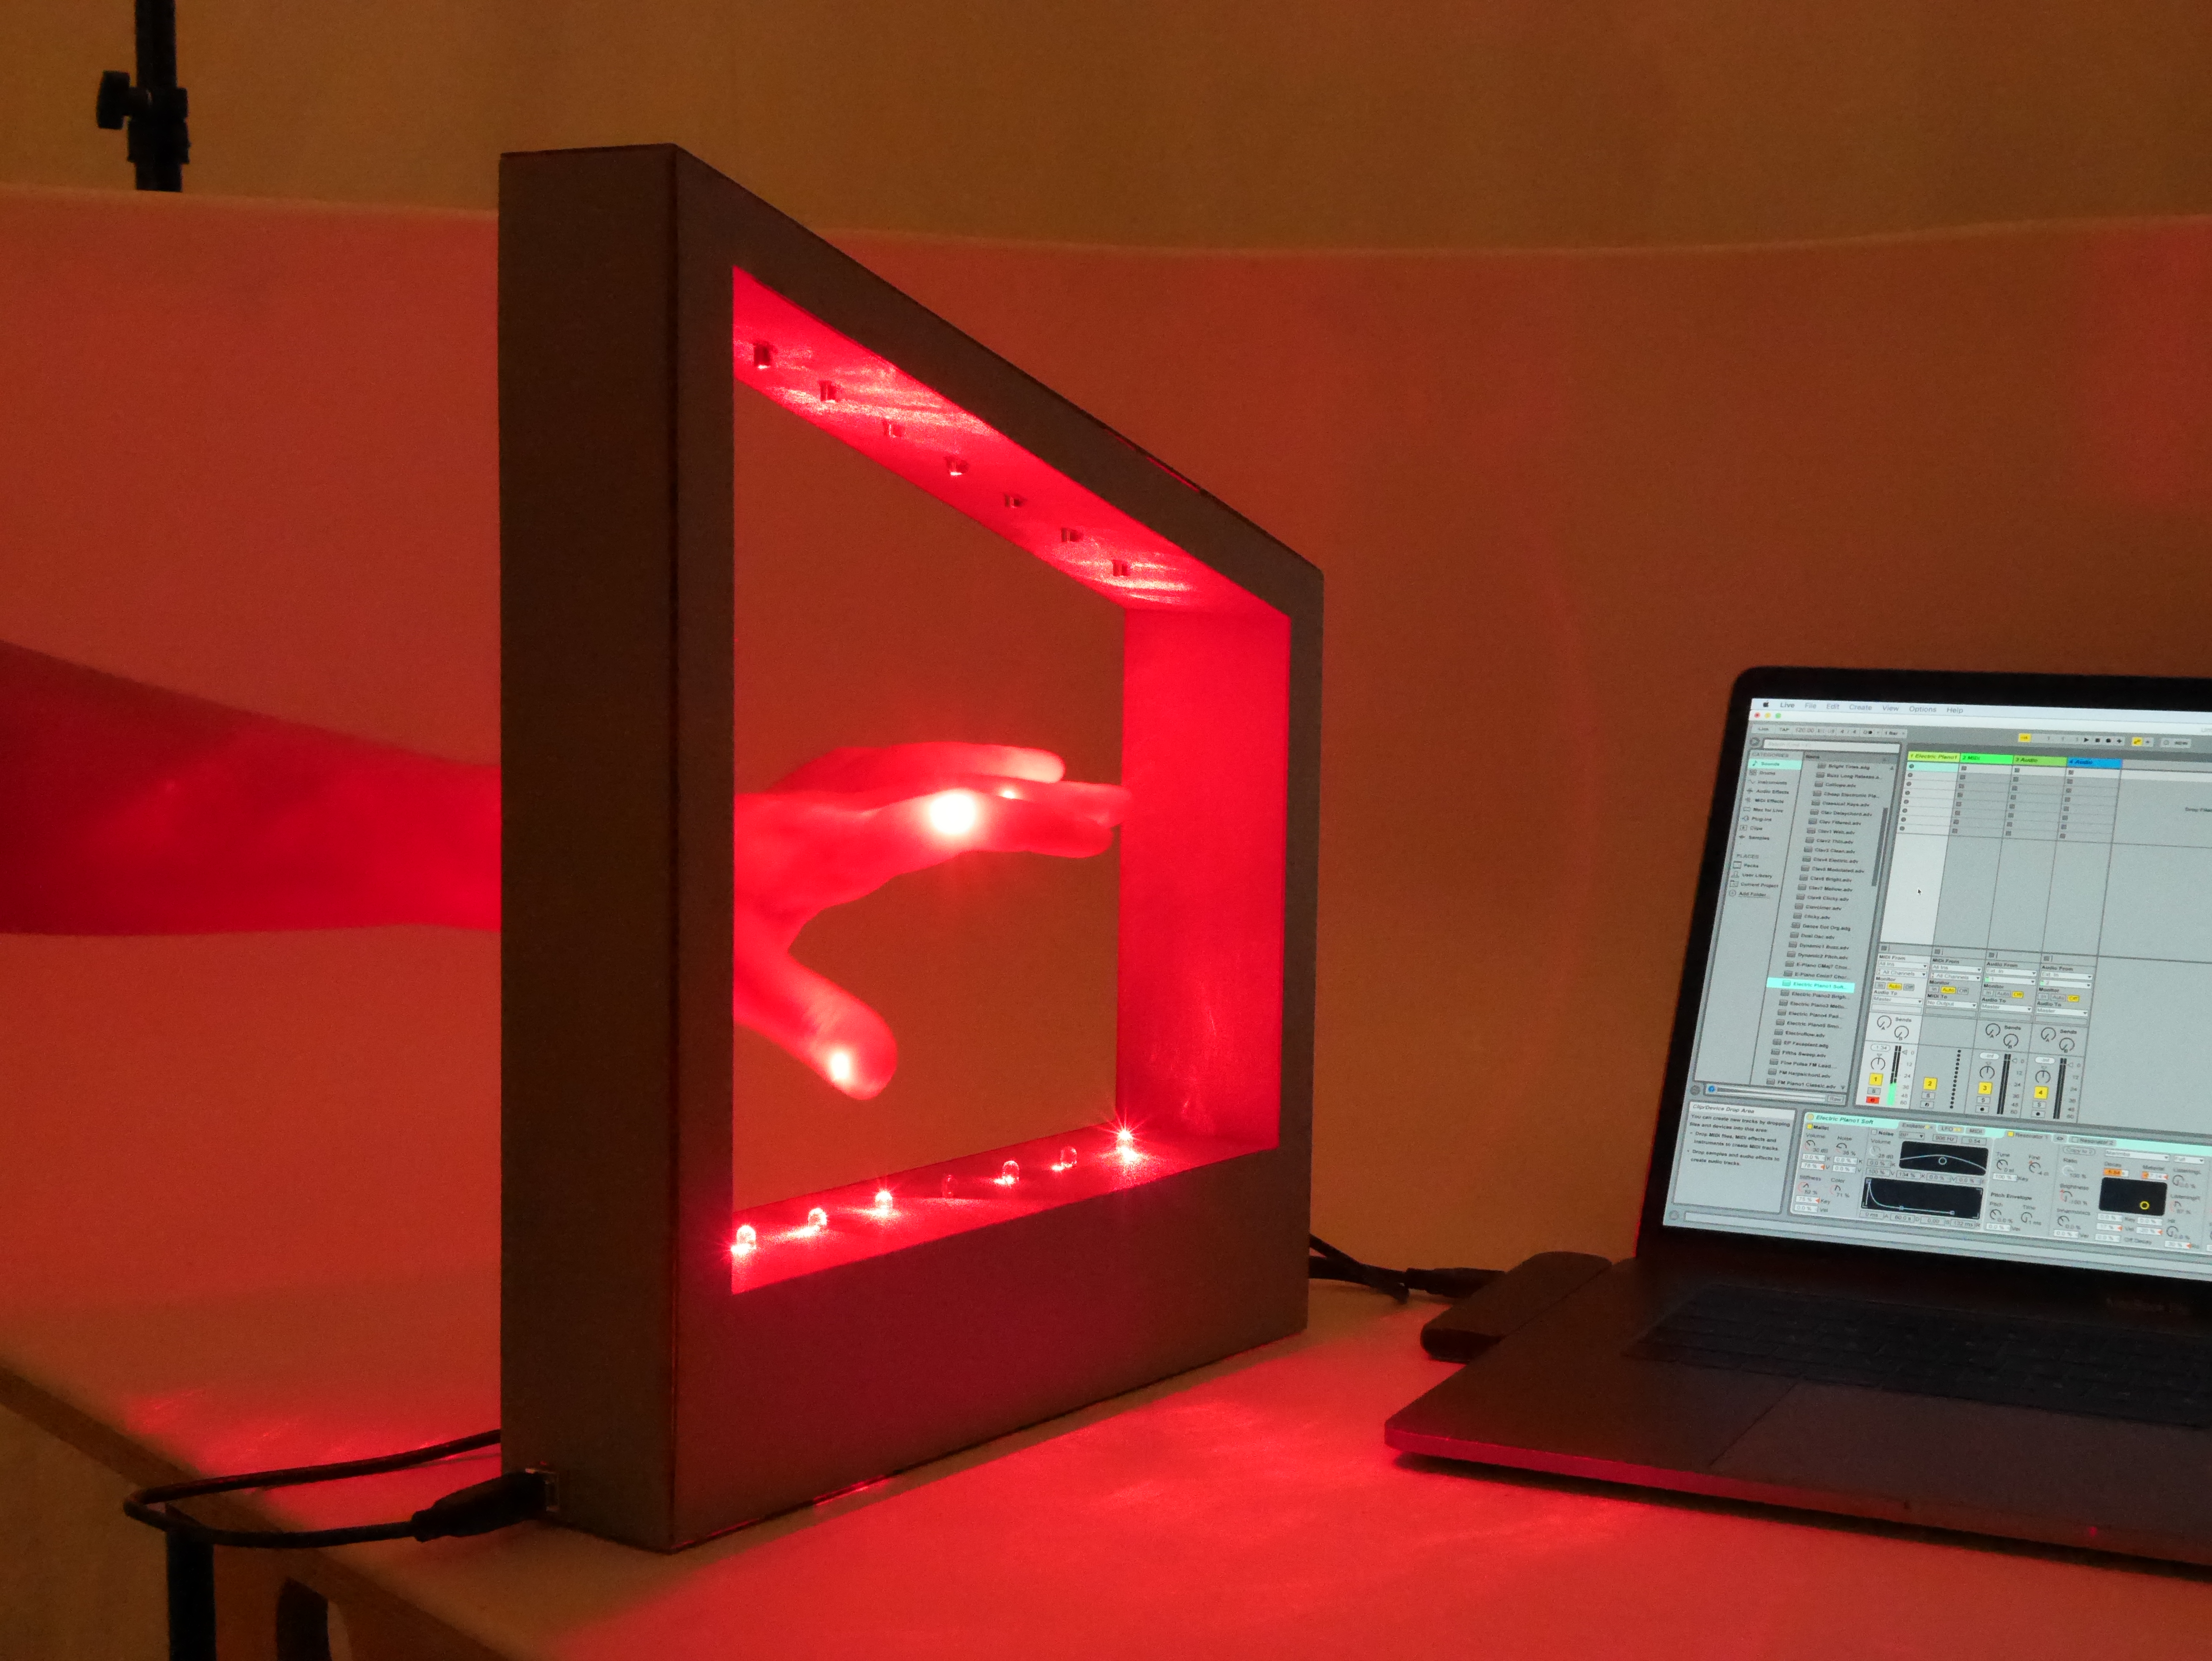 Our laser harp is a controller that provides an interactive audio and visual experience.